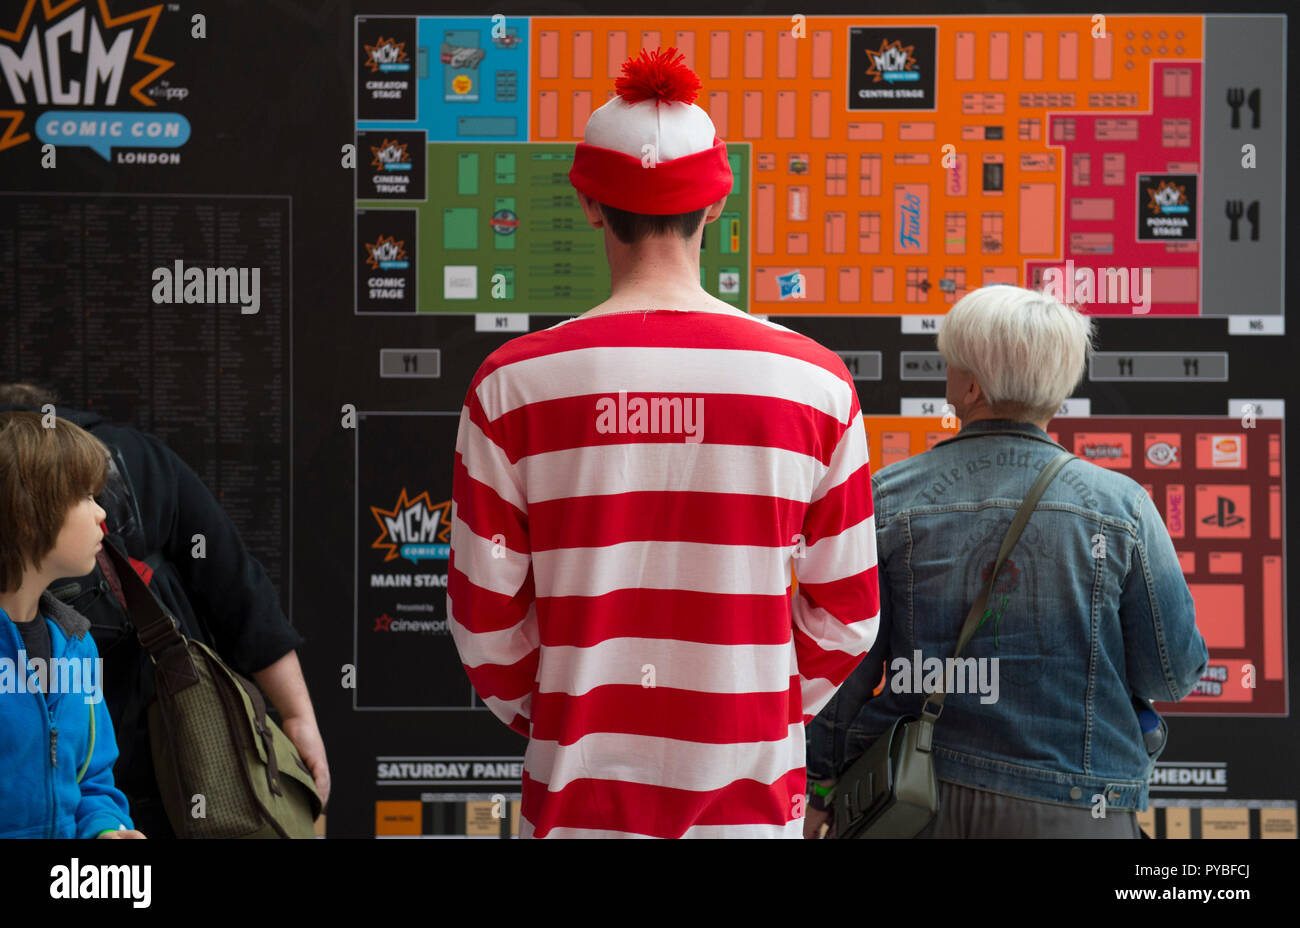 ExCel, London, UK. 26 October, 2018. Three day MCM Comic Con, comic book and cosplay event, opens at ExCel with many visitors in elaborate cosplay costume. Wally checks the information board. Credit: Malcolm Park/Alamy Live News. Stock Photo